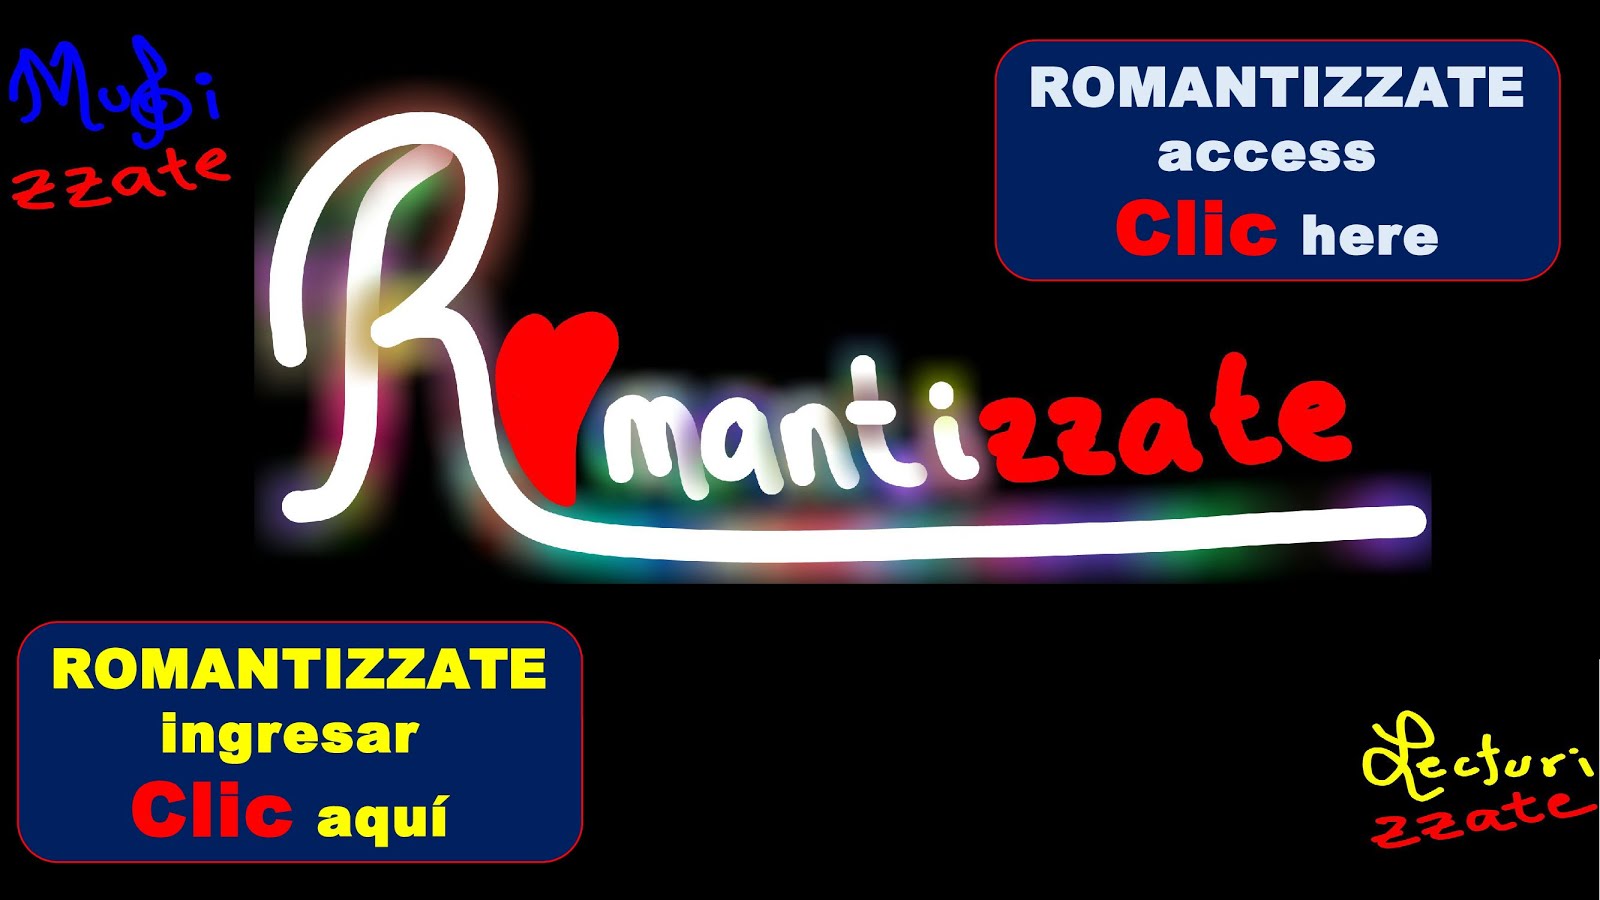 ROMANTIZZATE deeply within Love True, discover more, access ...